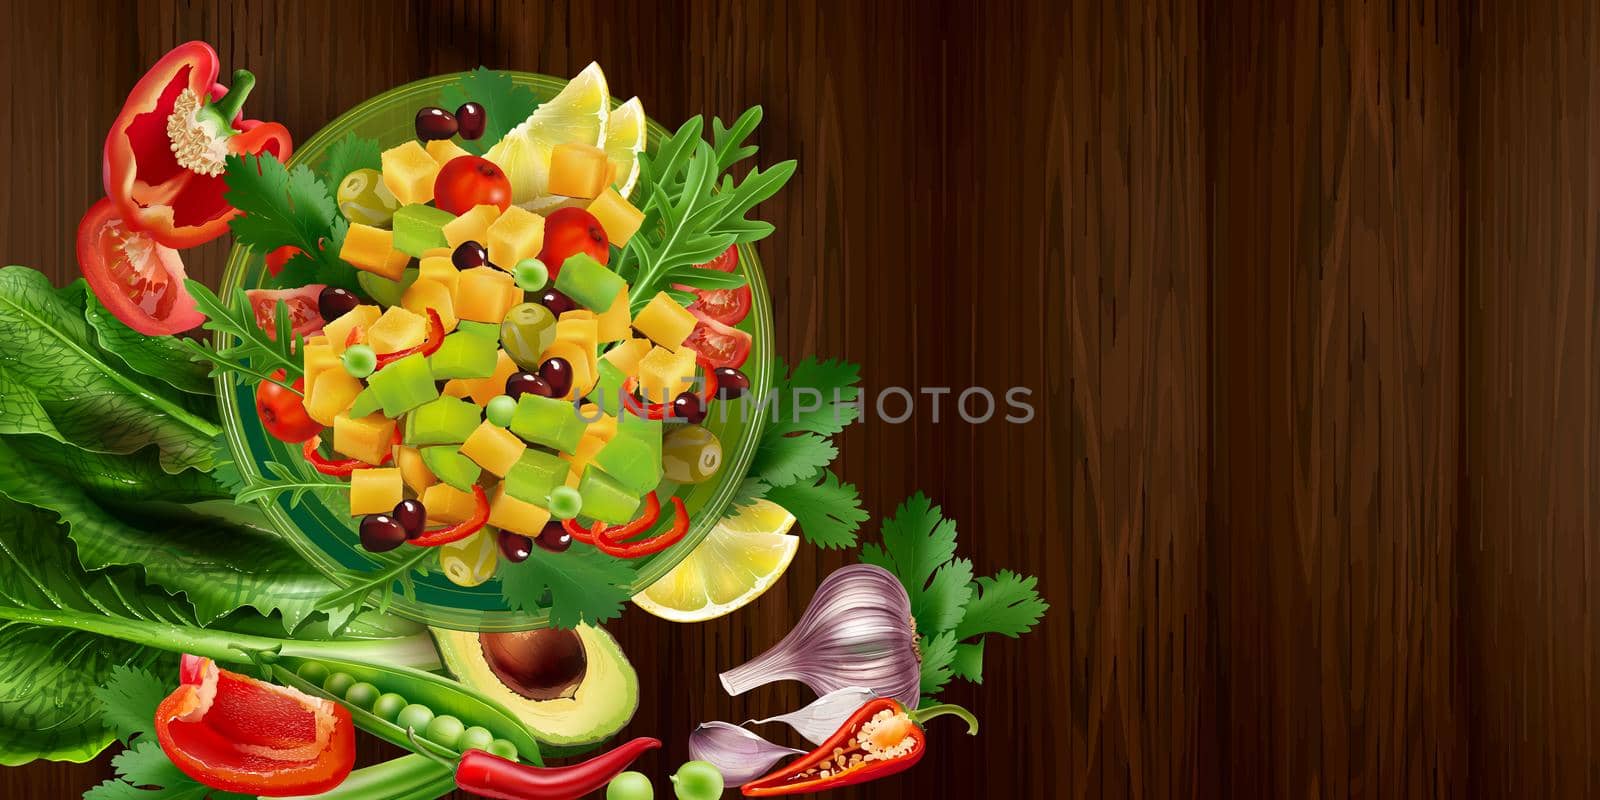 Mexican avocado salad and vegetables on a wooden table. Realistic style illustration.